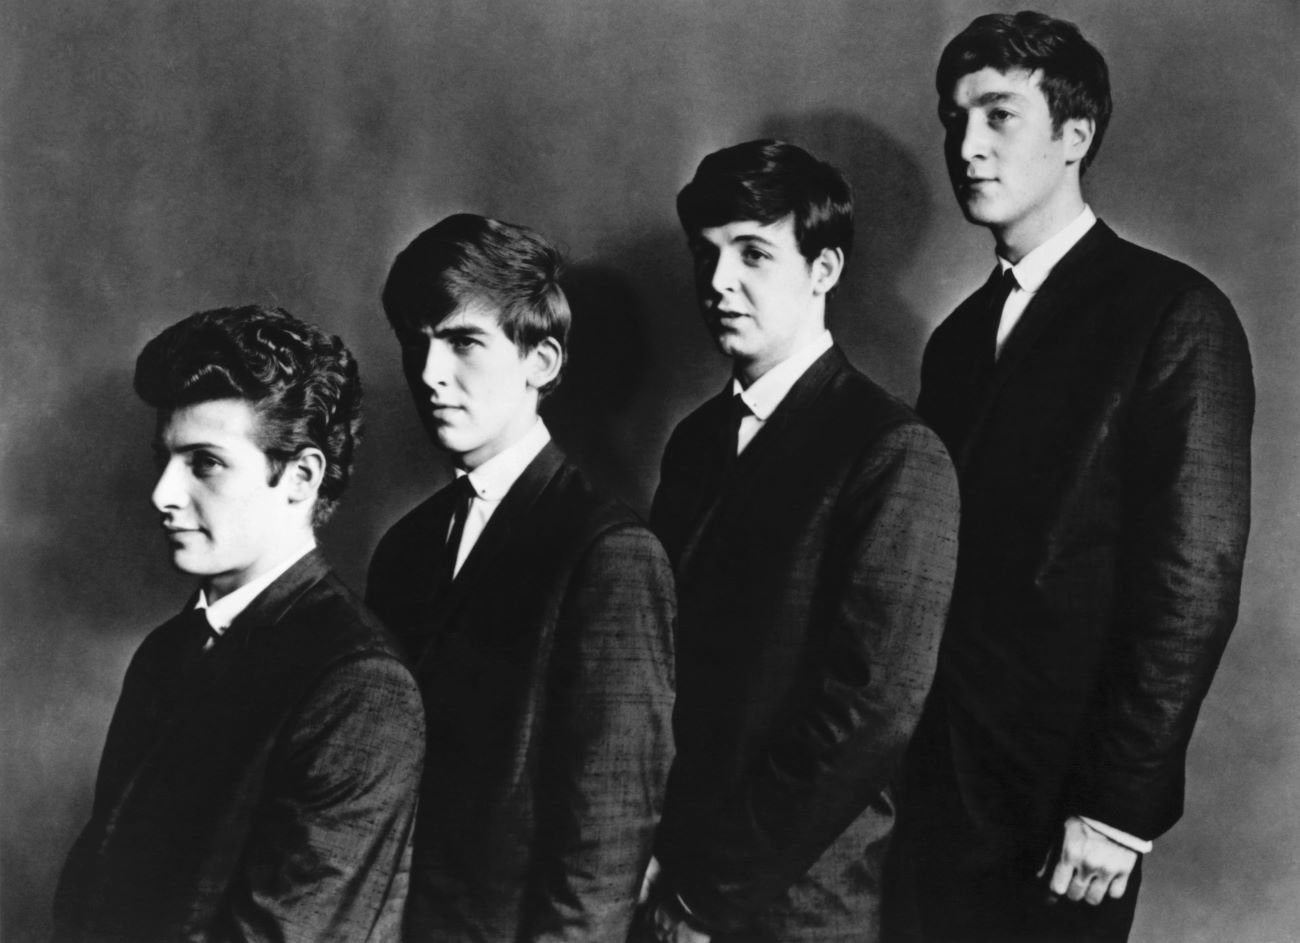 A black and white photo of Pete Best, George Harrison, Paul McCartney and John Lennon standing in an ascending line.